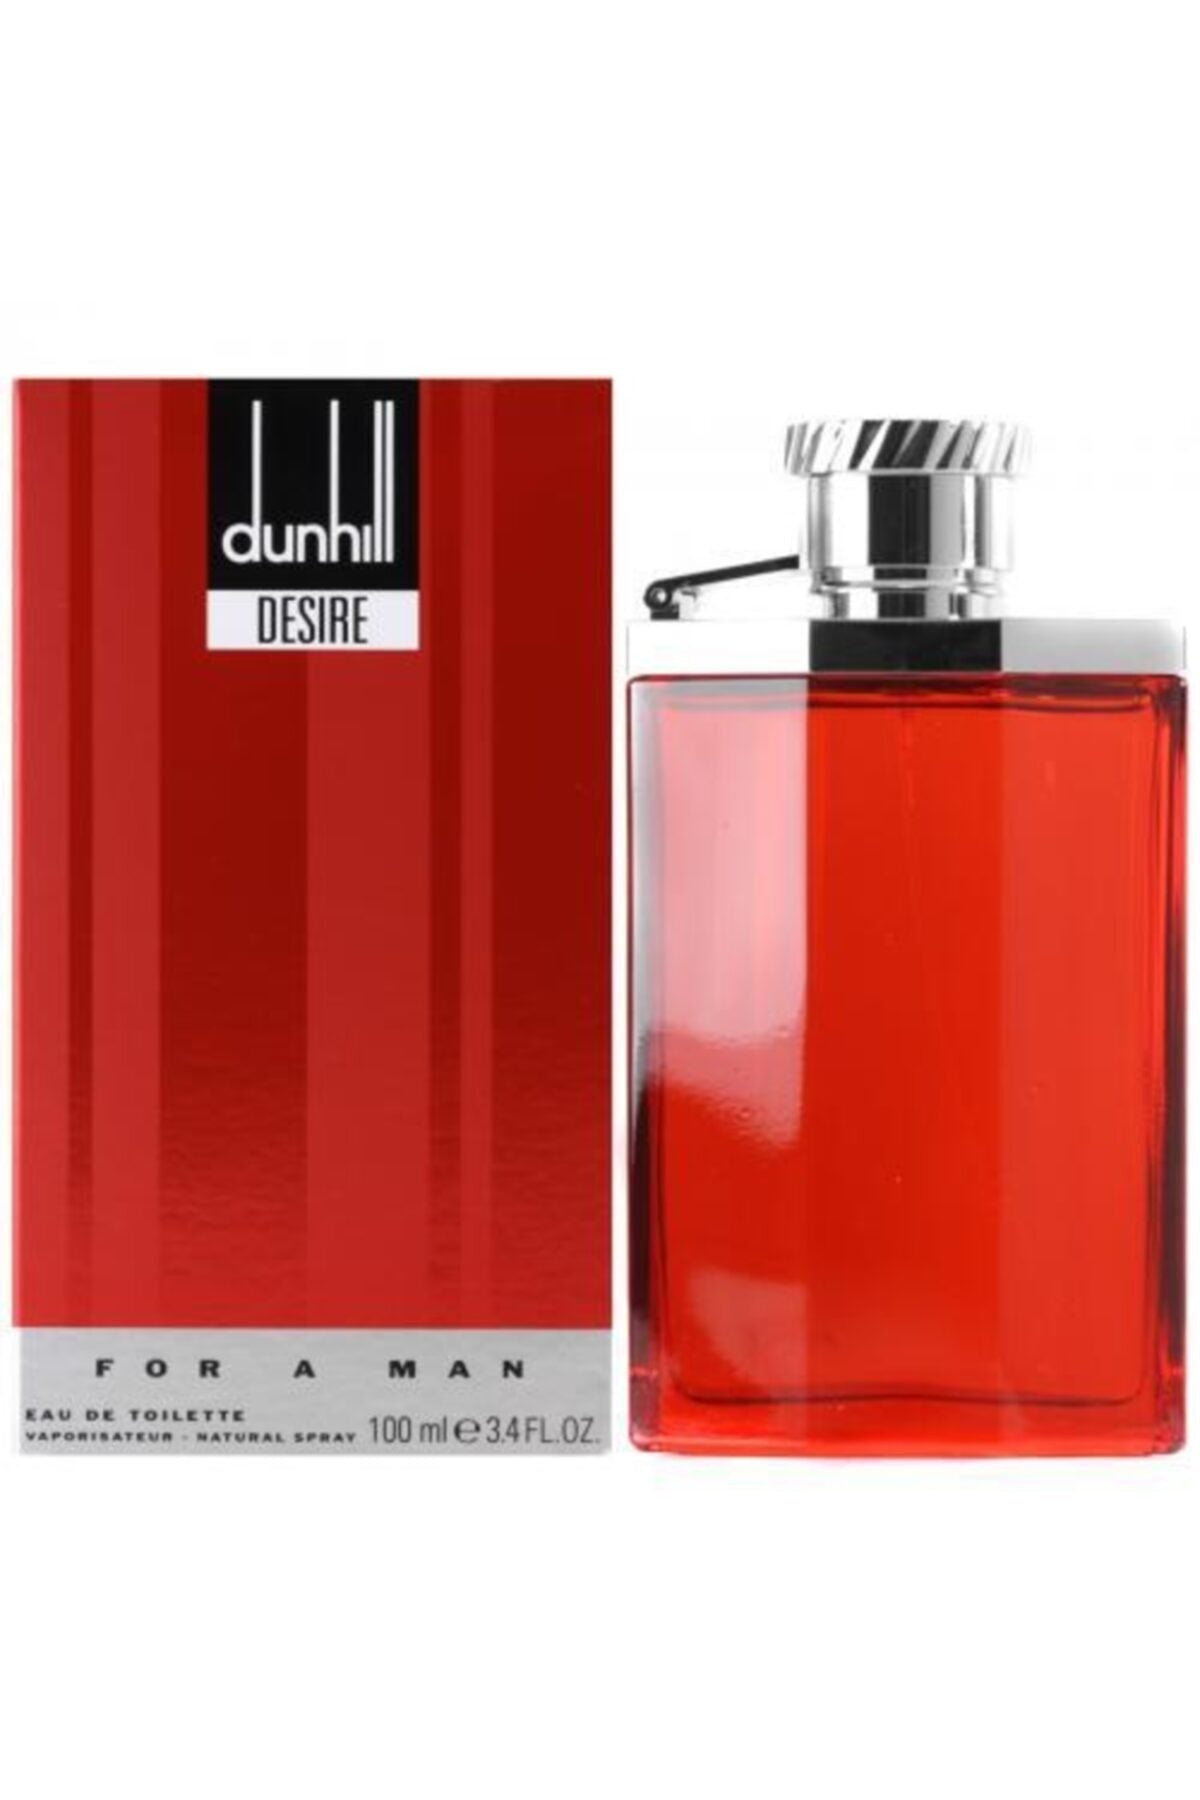 Tester - Dunhill Desire Red EXTREME Edition M 100ml Tester (Rare Selection)